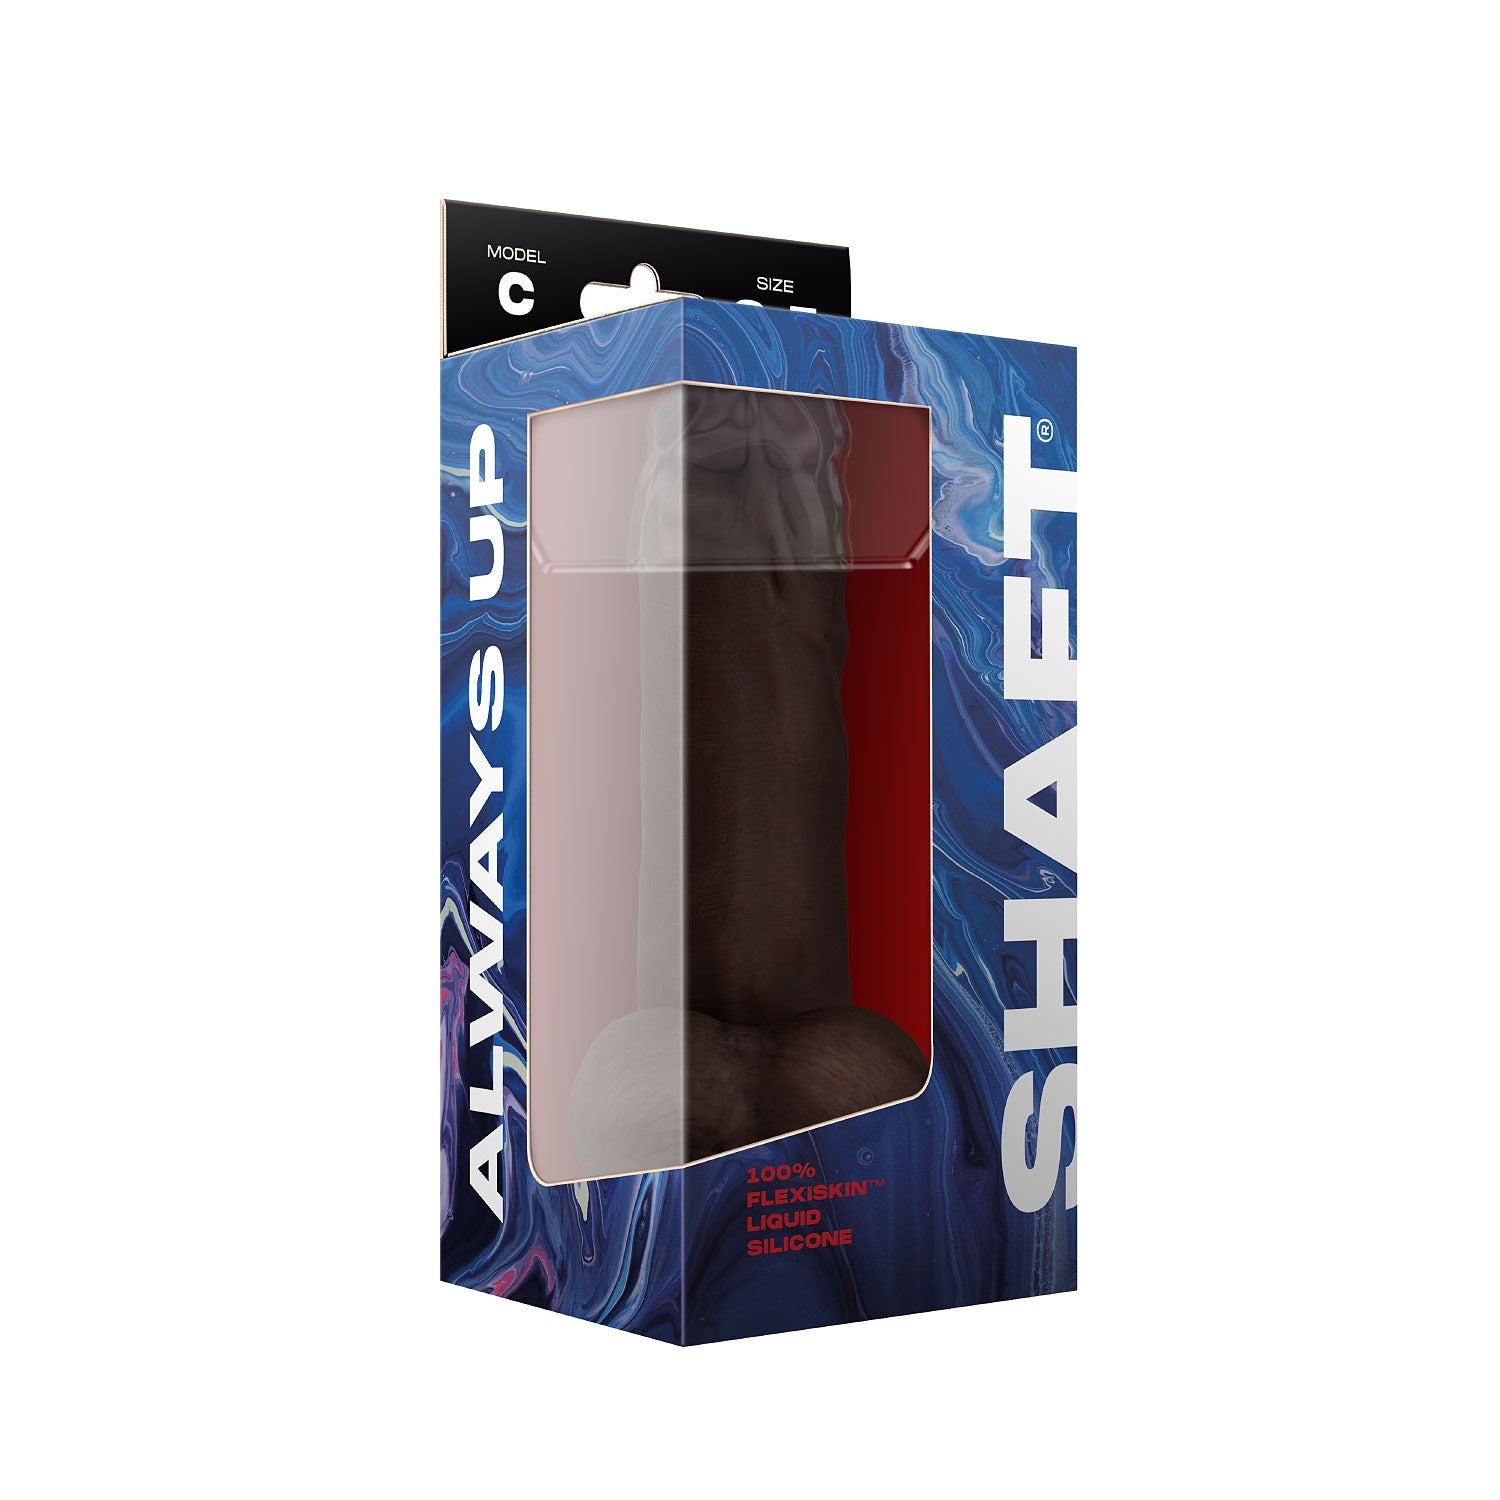 Shaft - Model C 8.5 Inch Liquid Silicone Dong With Balls - Mahogany-1